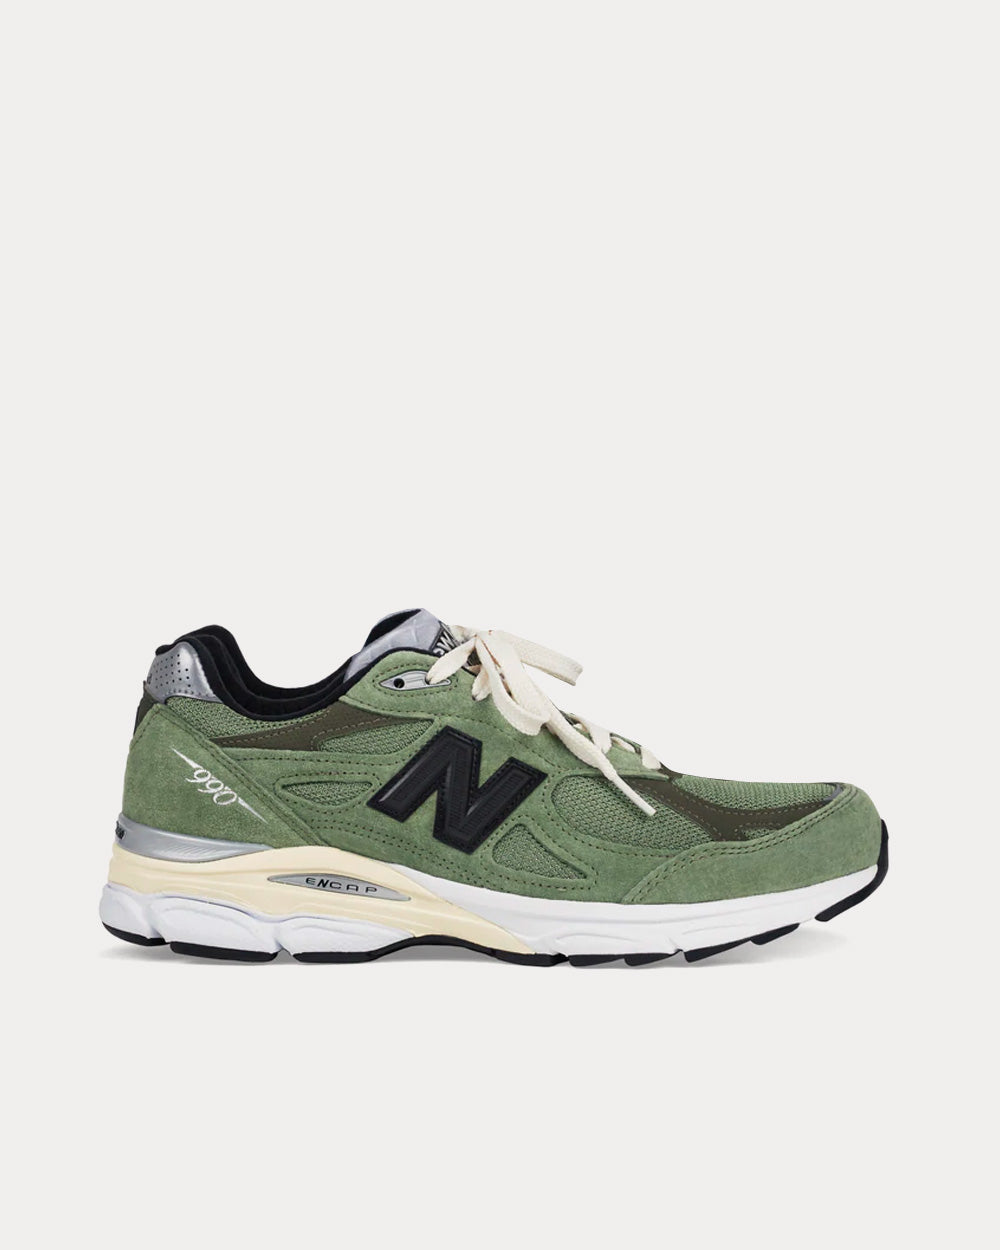 Confundir Pegajoso forma New Balance x Jjjjound MADE 990v3 Olive Low Top Sneakers - Sneak in Peace